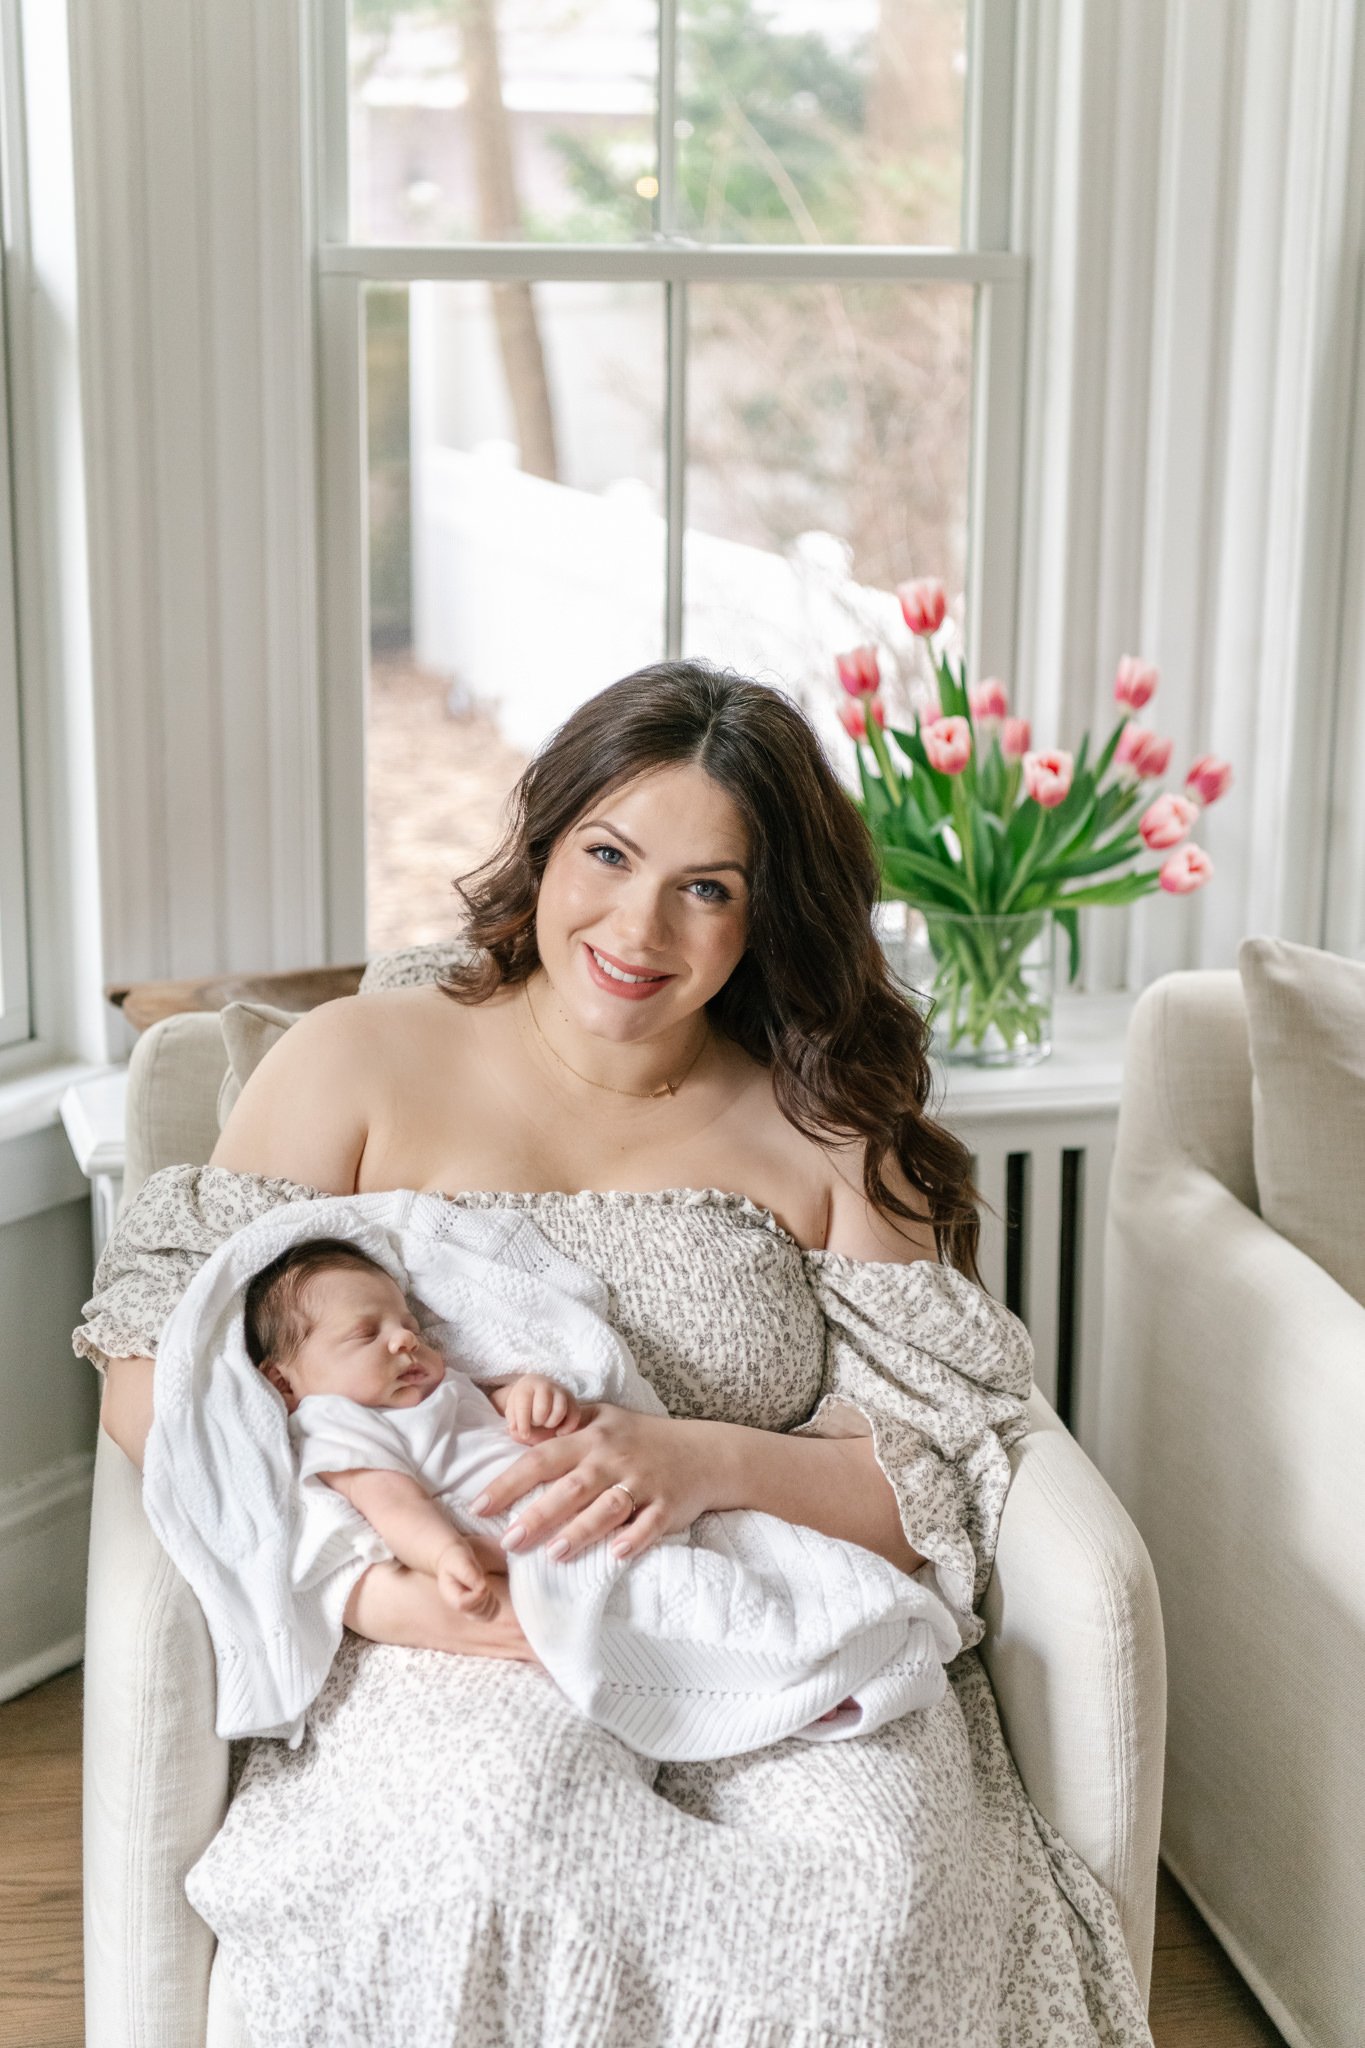  A mother smiles while sitting in her home during a newborn session with Professional Nicole Hawkins Photography. mother and baby portrait in-home newborn outfit ideas #NicoleHawkinsPhotography #NicoleHawkinsNewborns #MontclairNewbornPhotographer #In